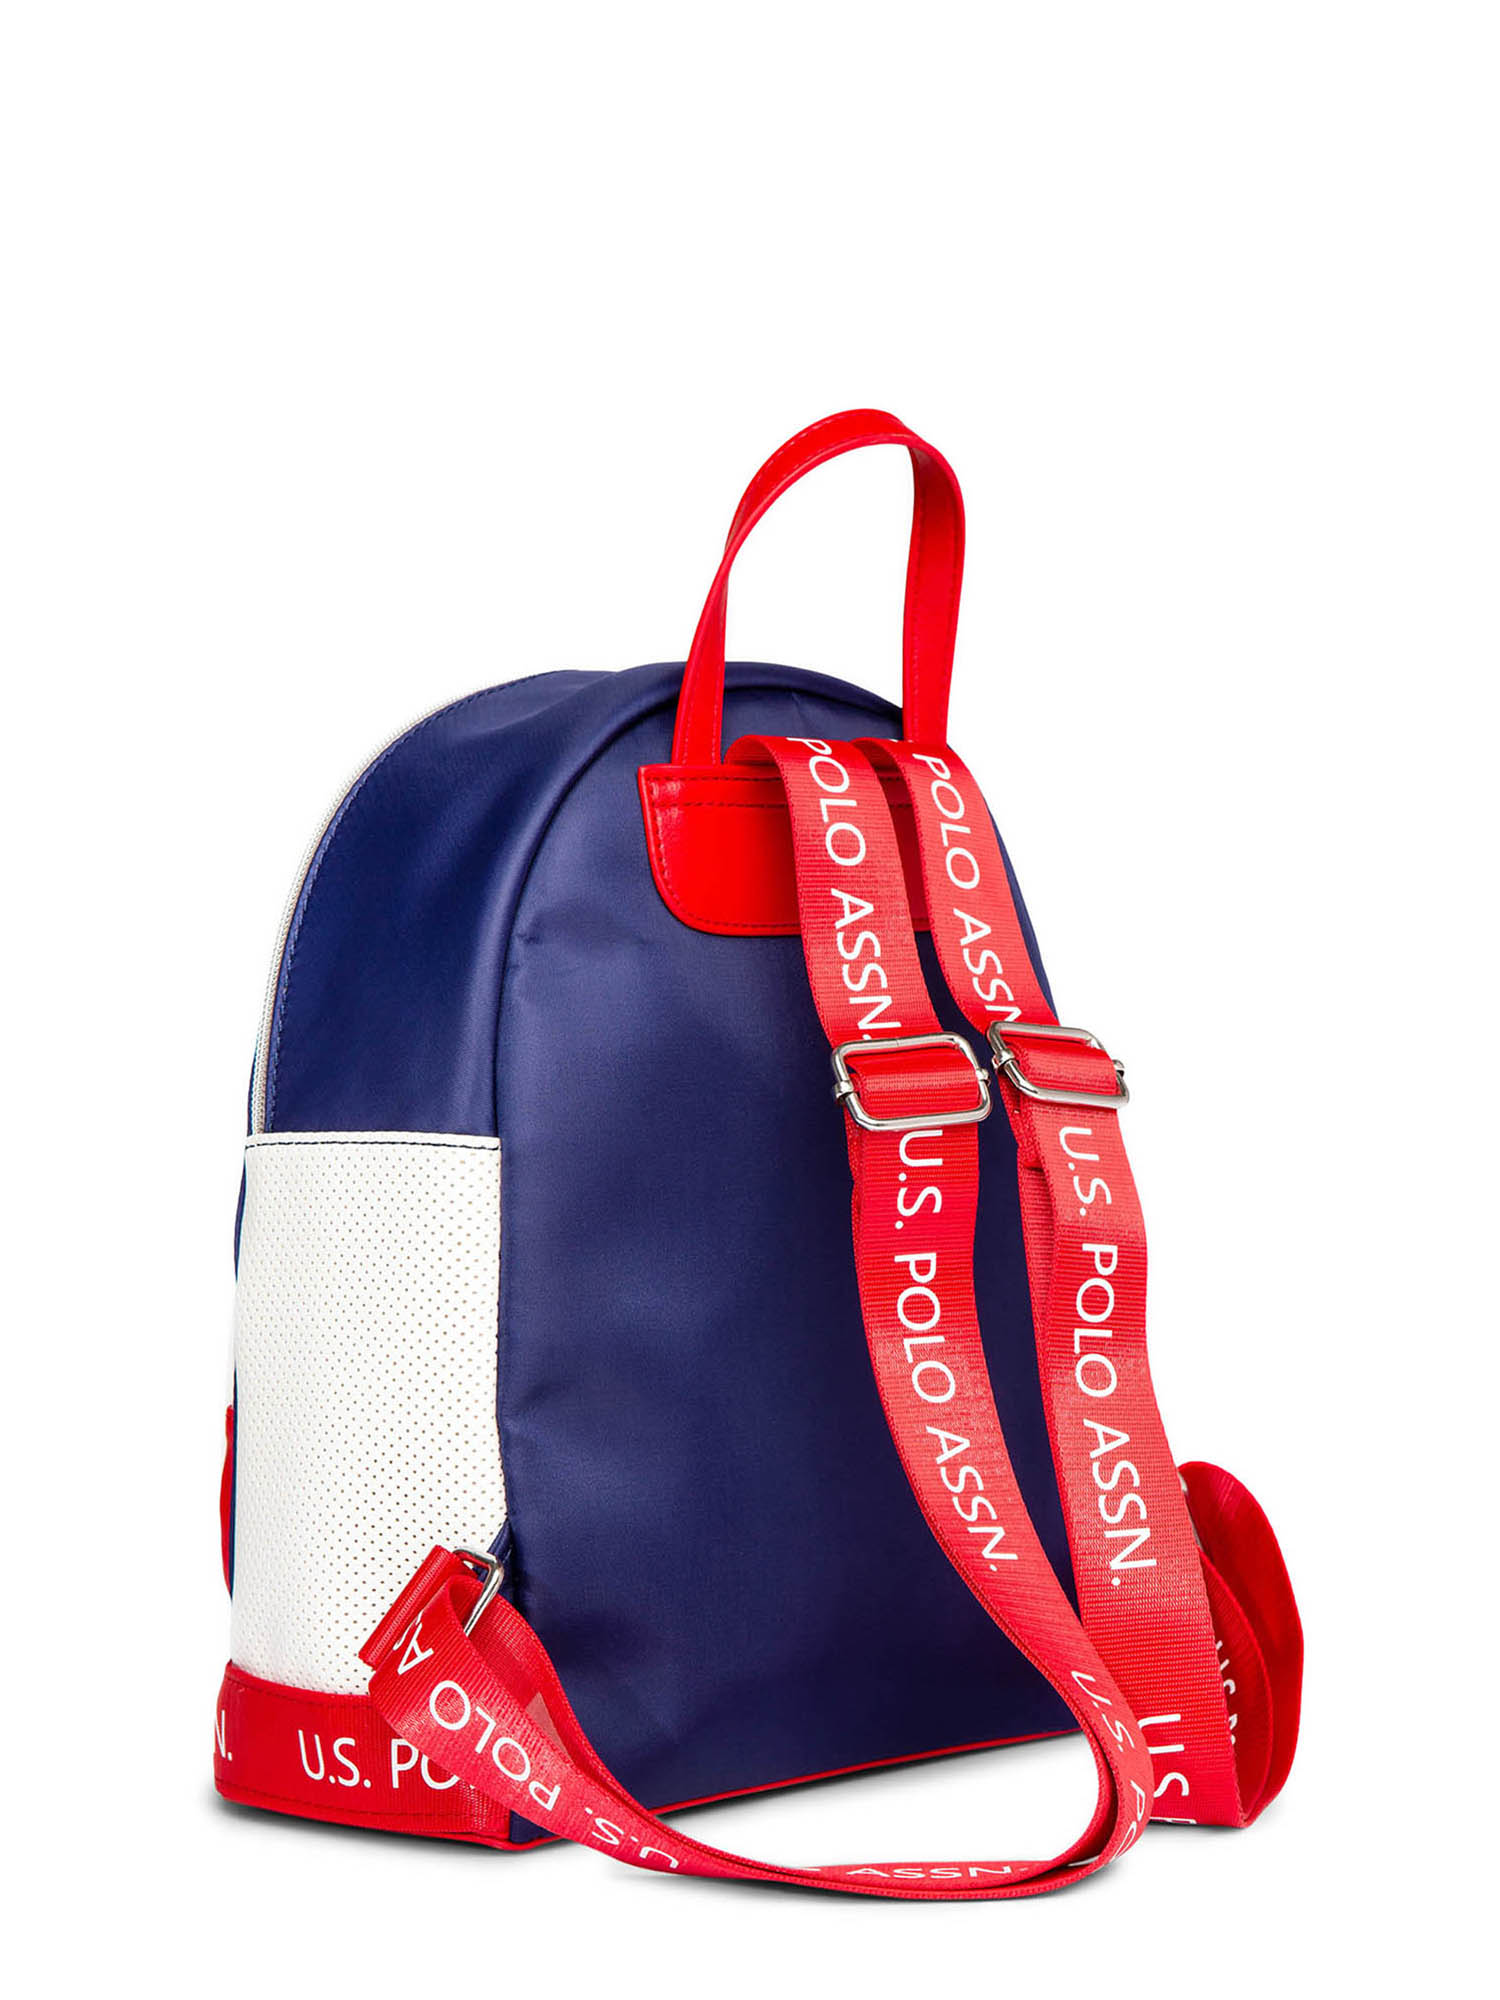 U.S. Polo Assn. Women's Sport Navy Red Backpack - image 2 of 2